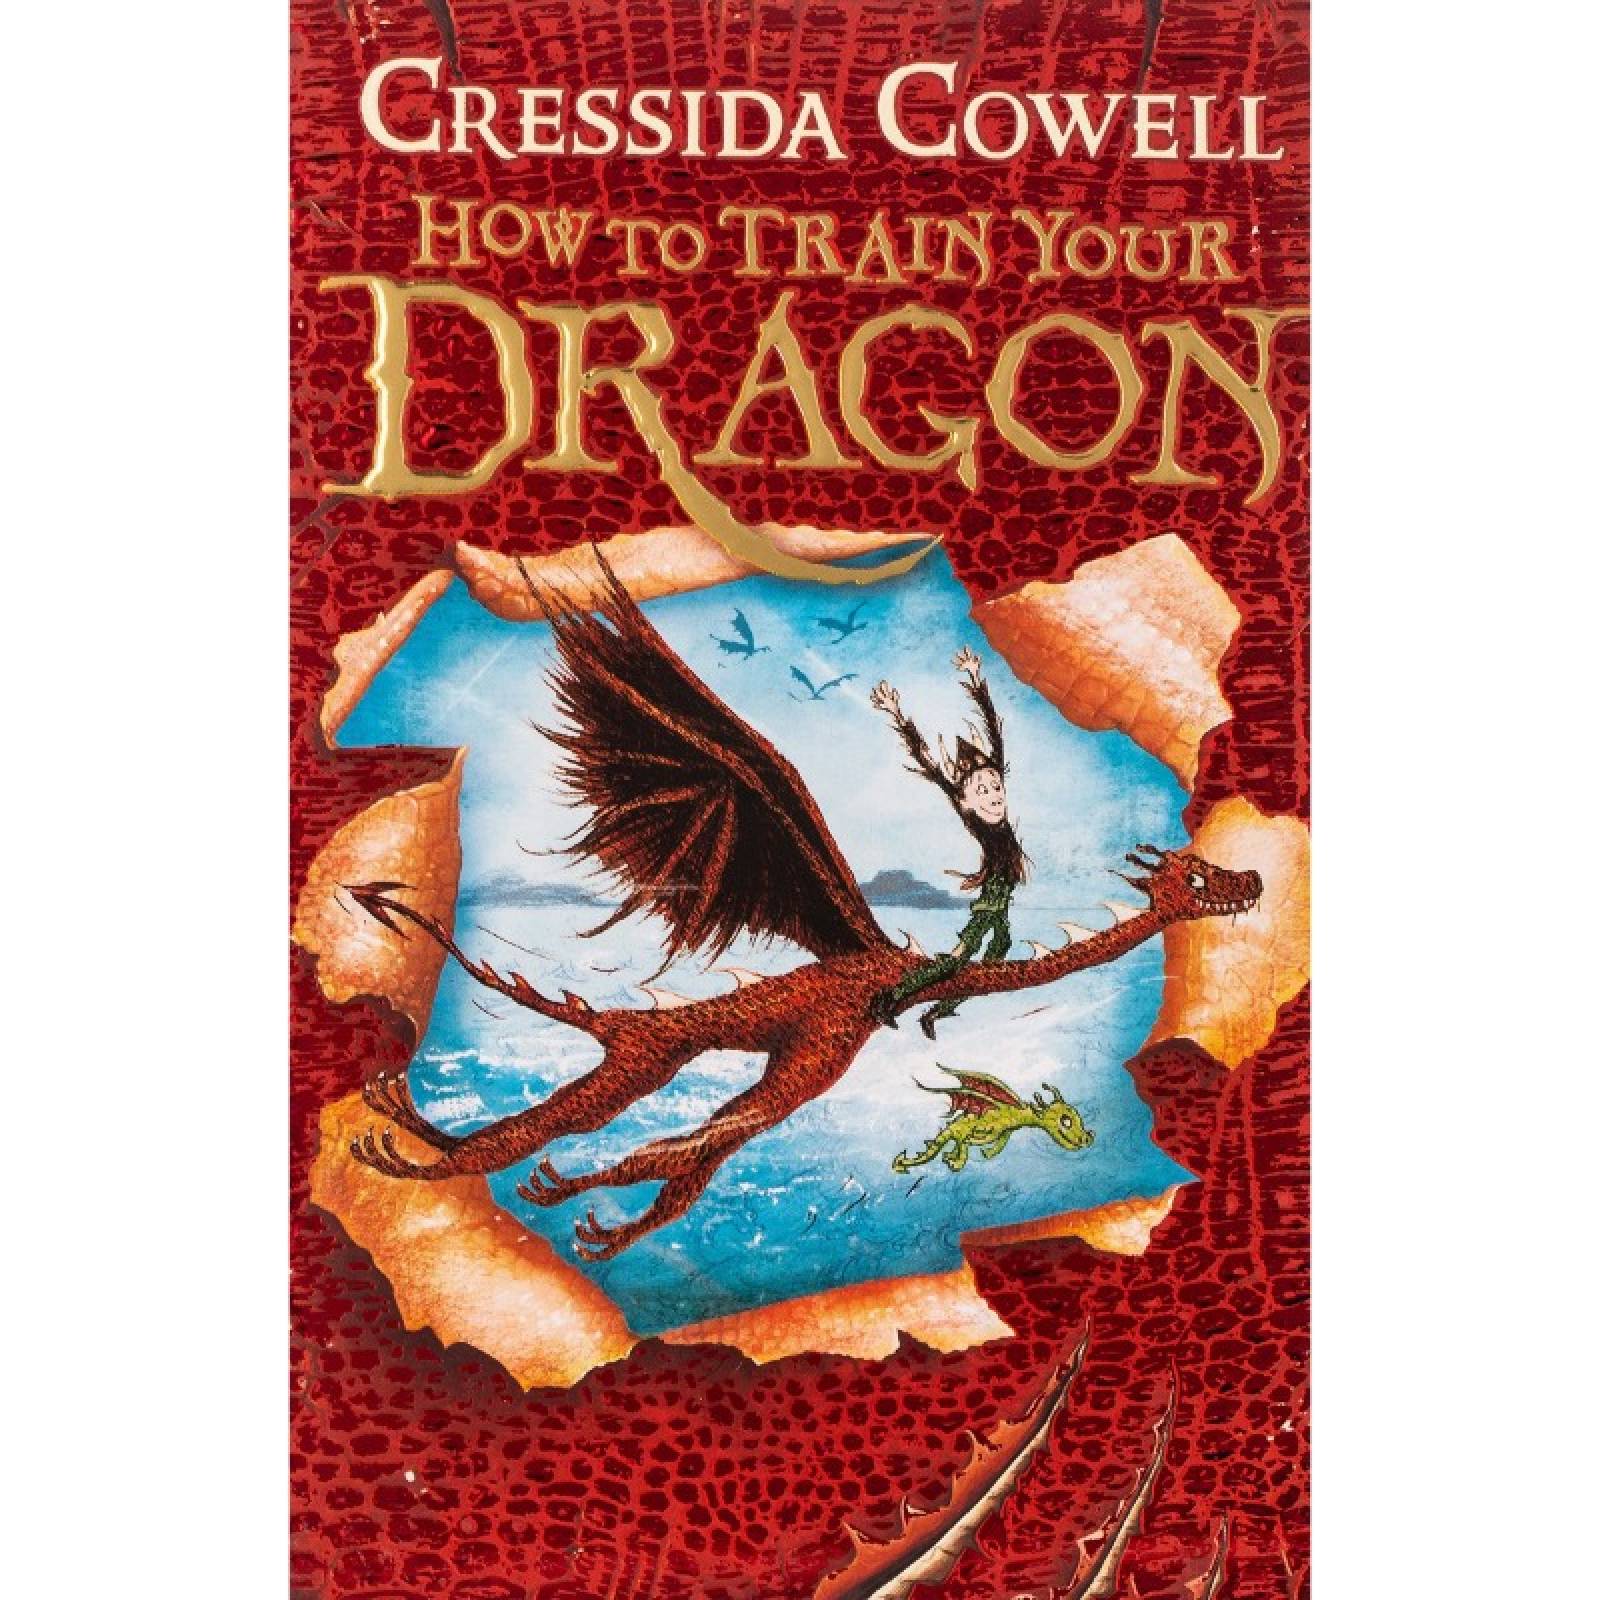 How To Train Your Dragon By Cressida Cowell - Paperback Book thumbnails